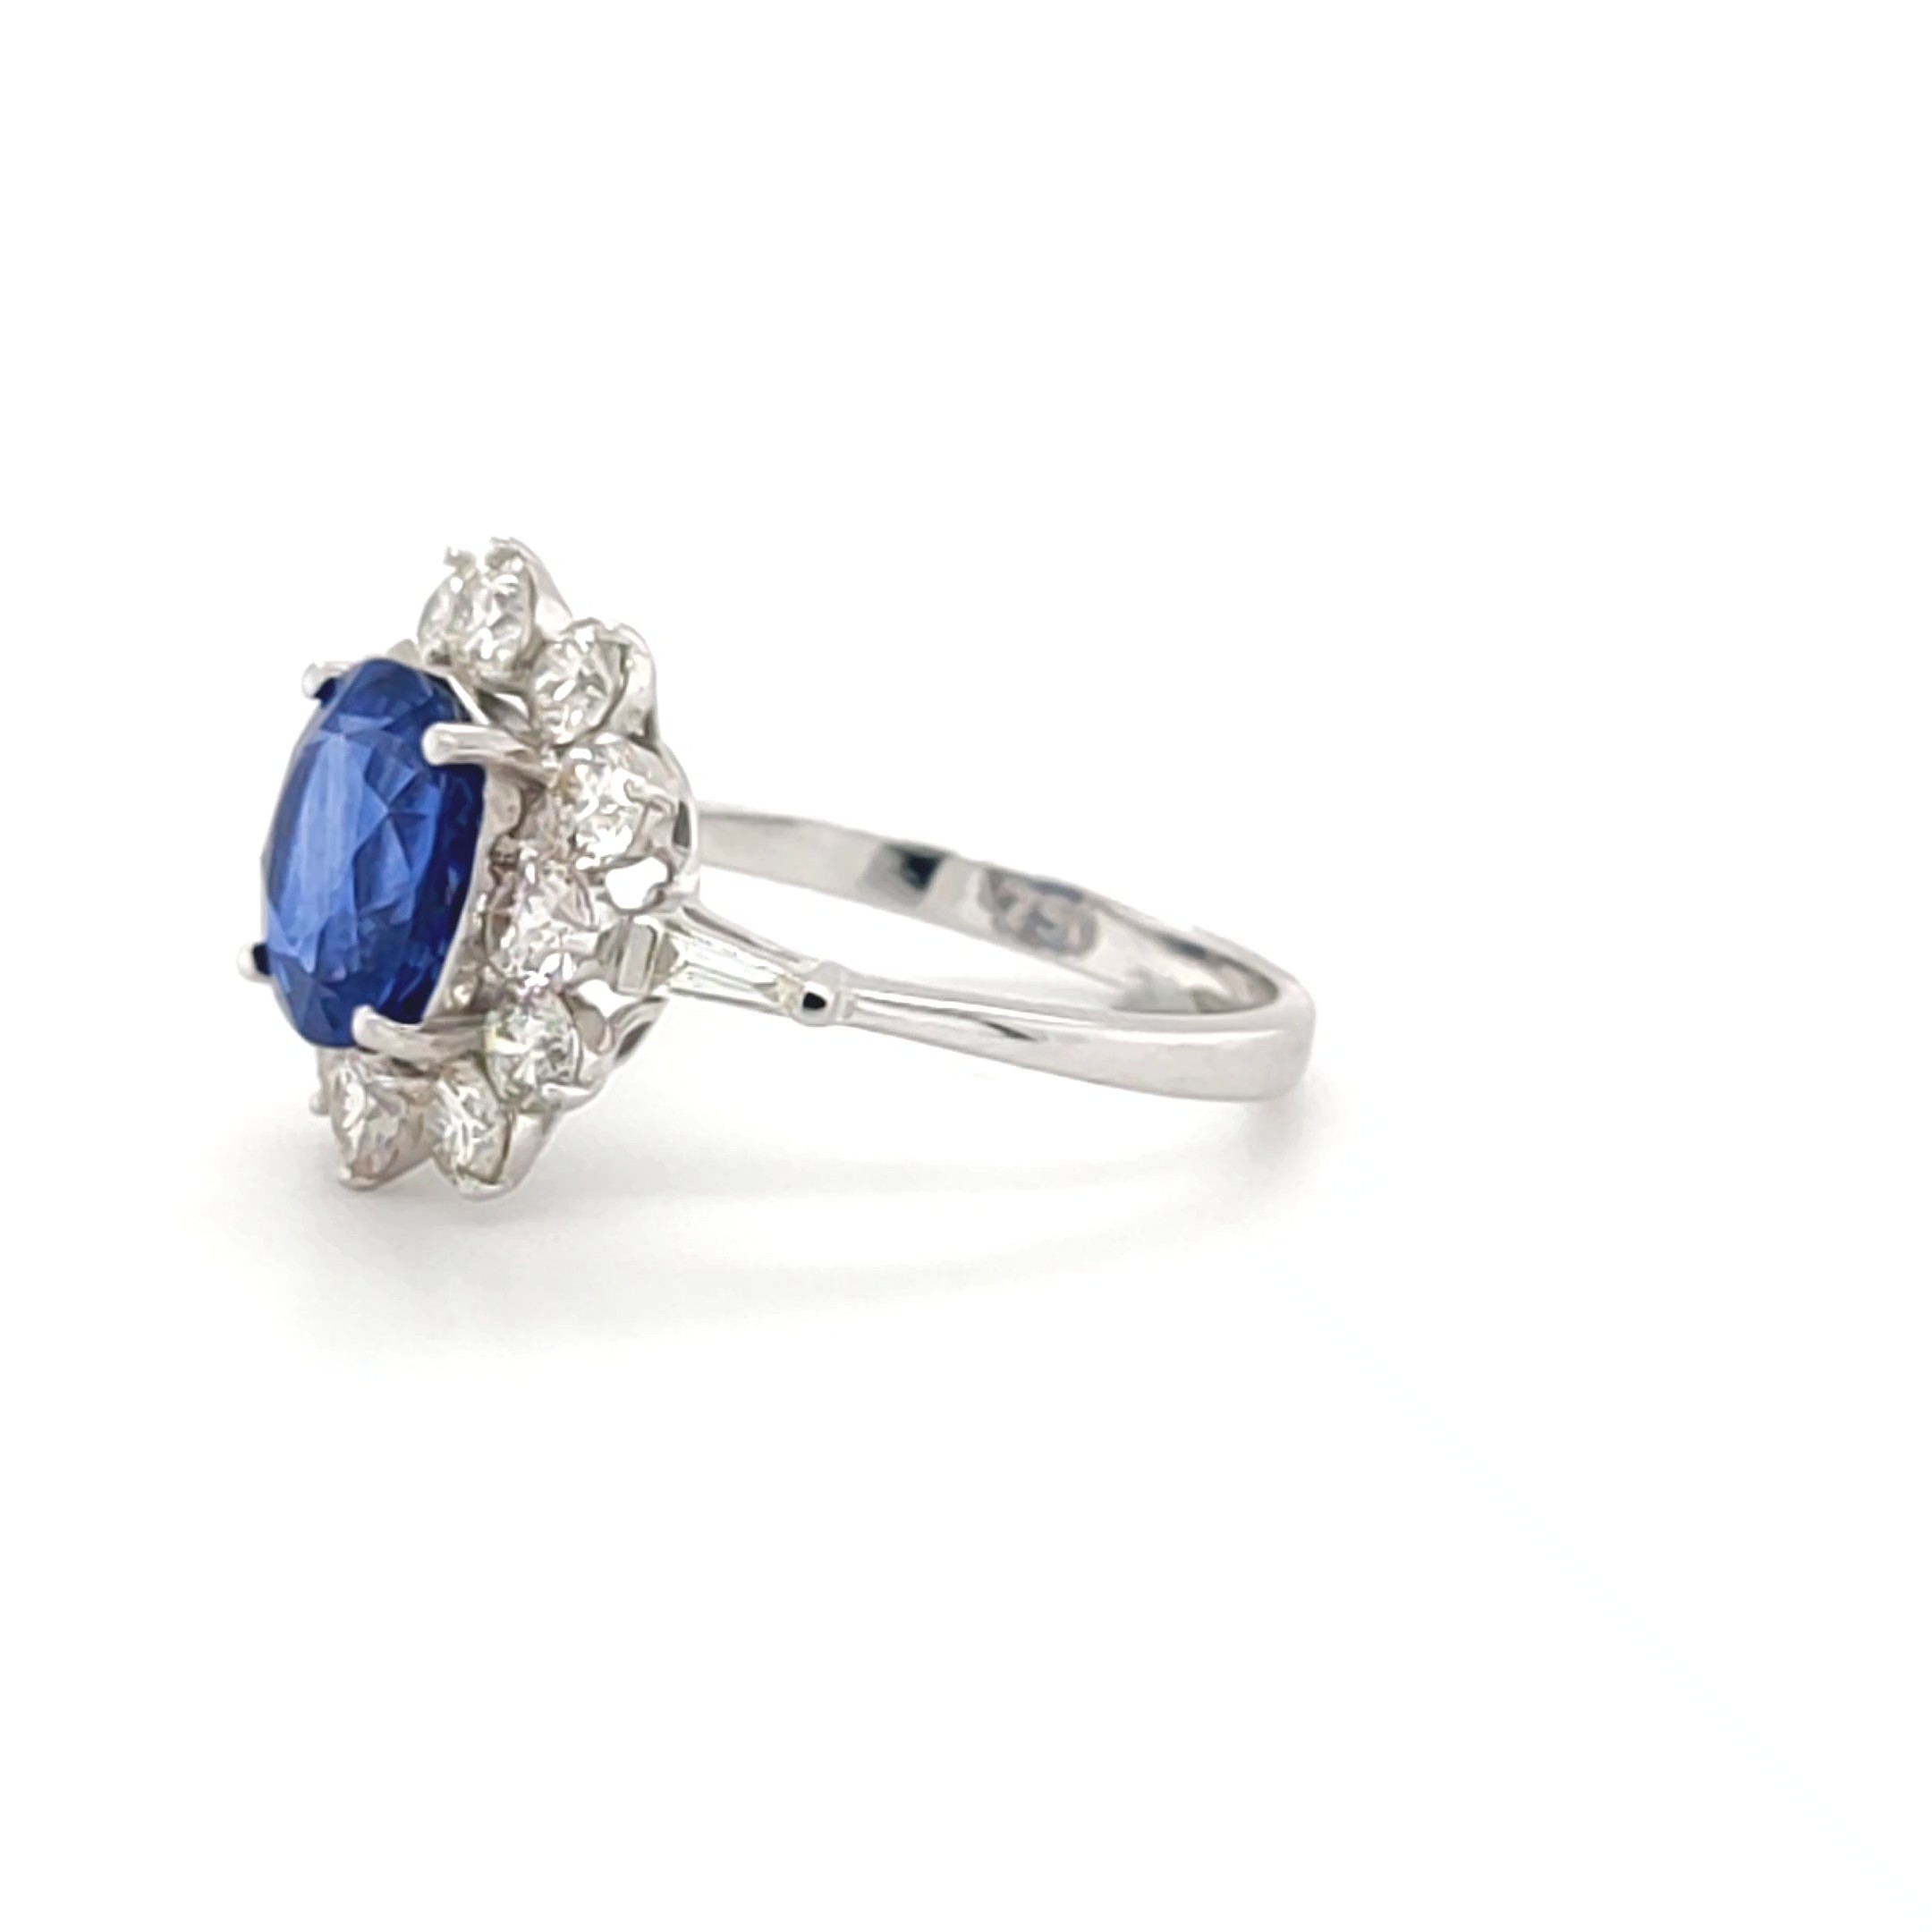 18ct White Gold 3.32ct (Assessed) Sapphire and 1.33ct (Assessed) Diamond Cluster Ring – Pre-Owned